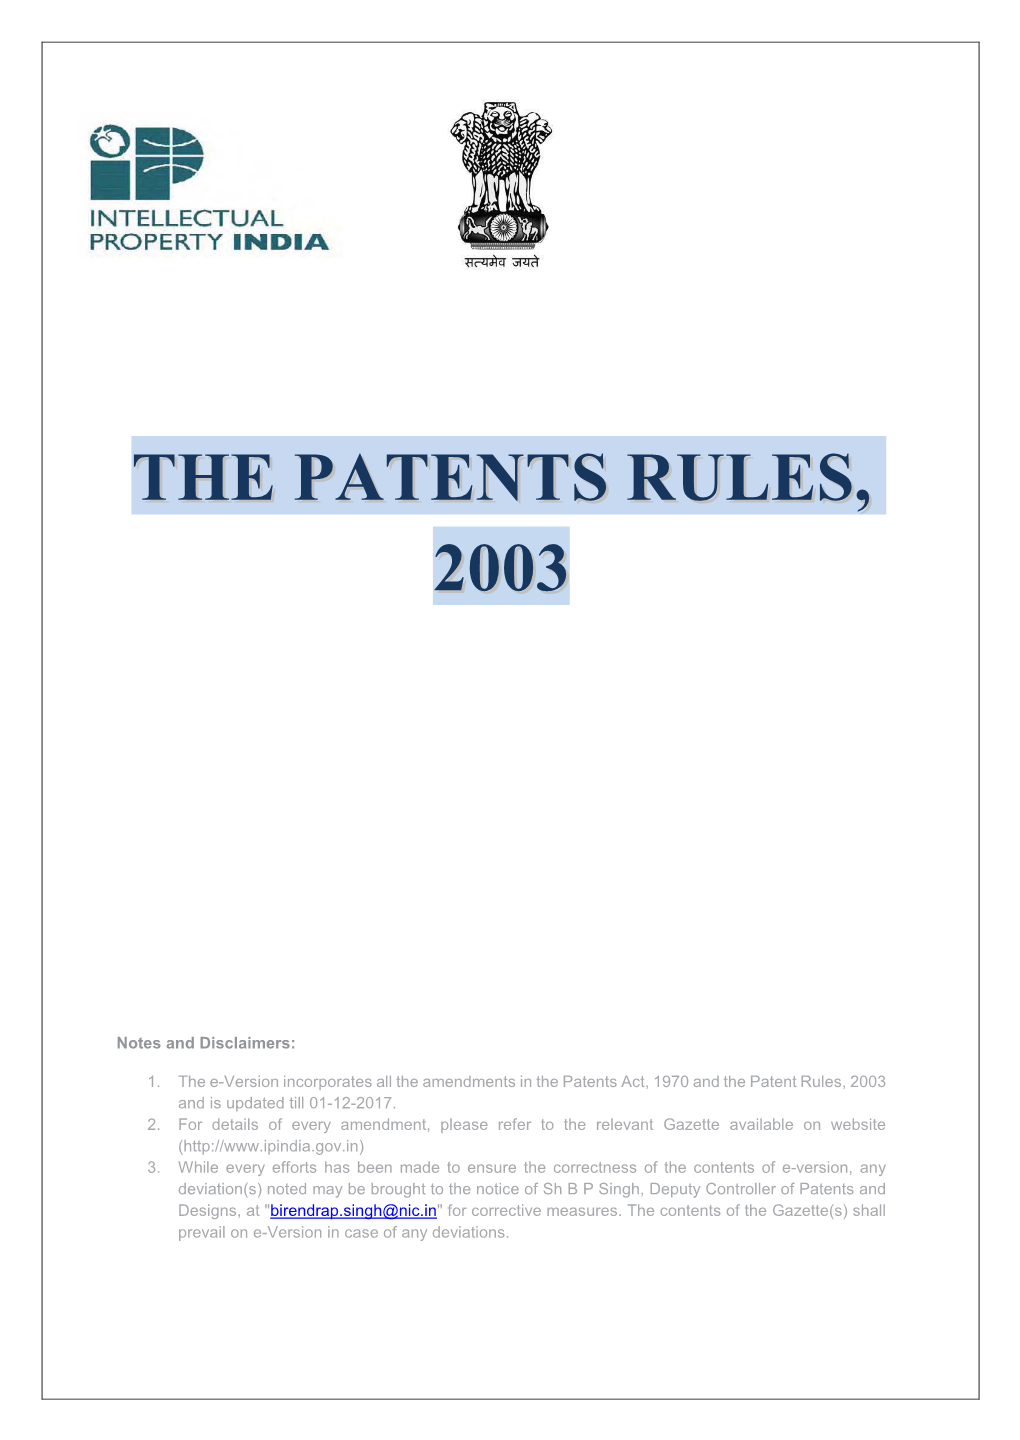 The Patents Rules, 2003